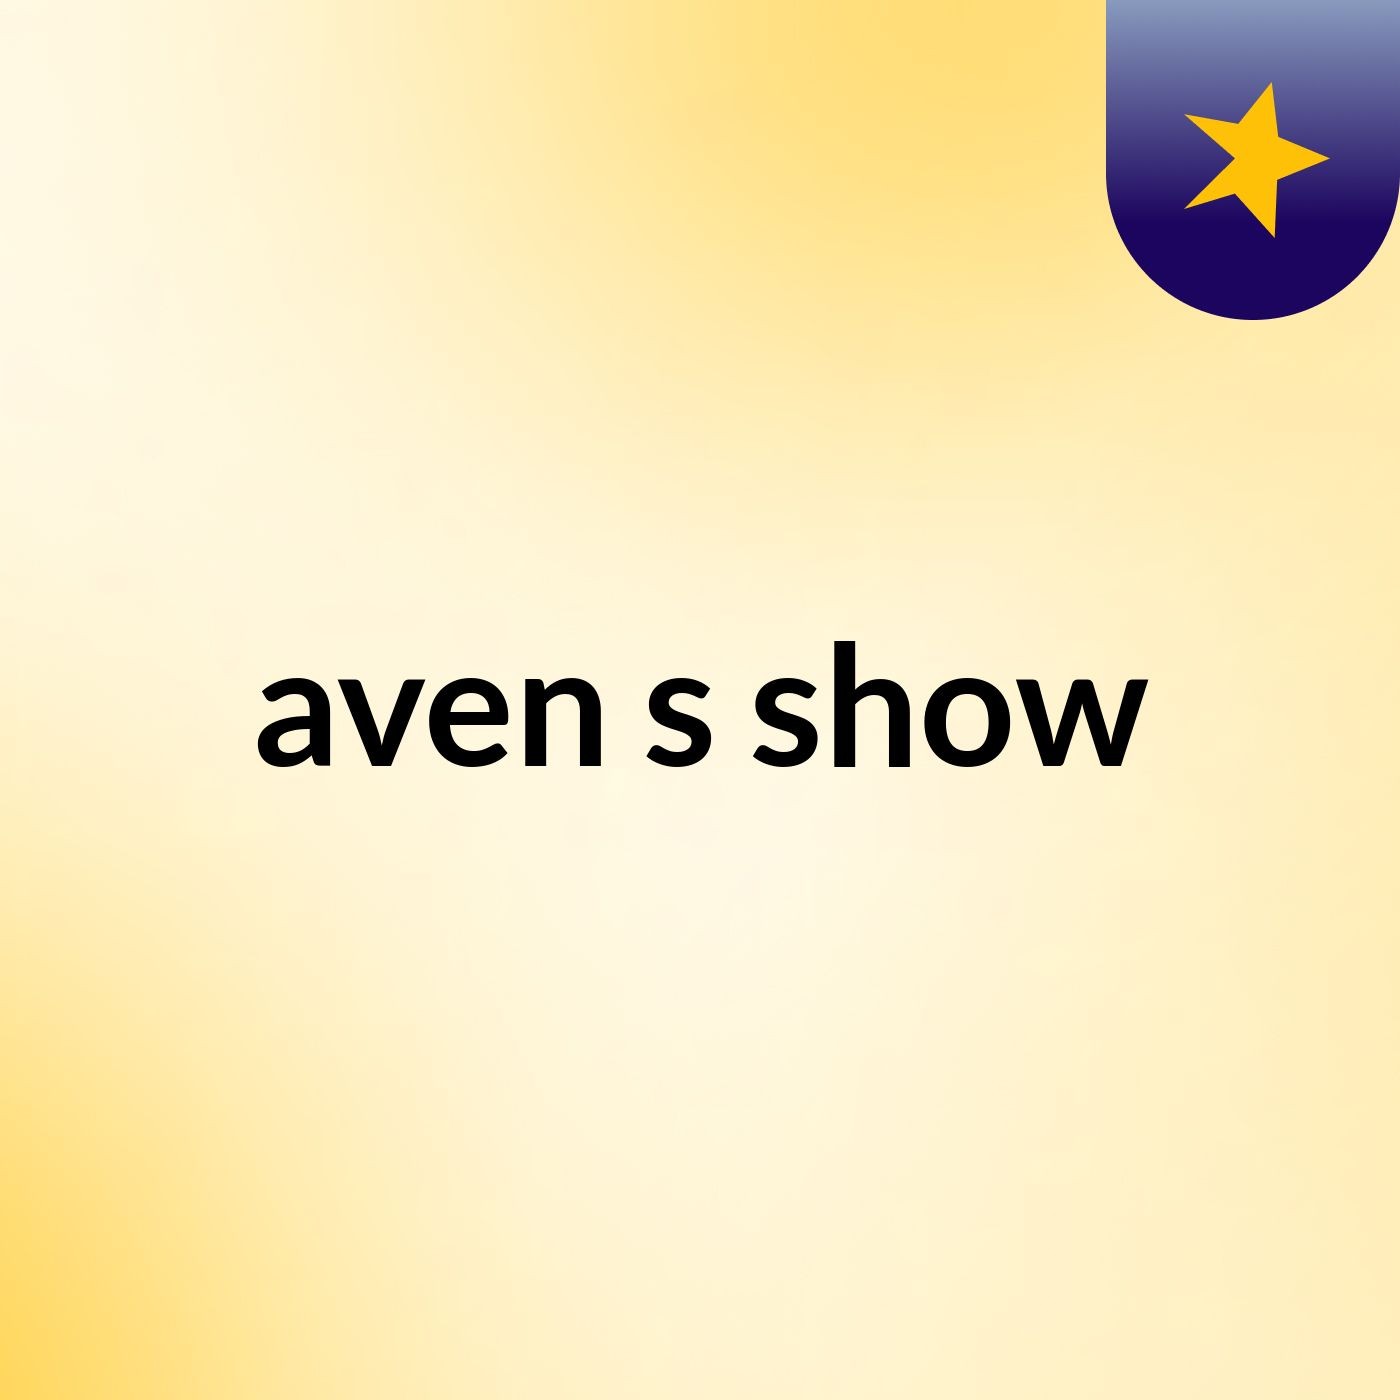 aven's show